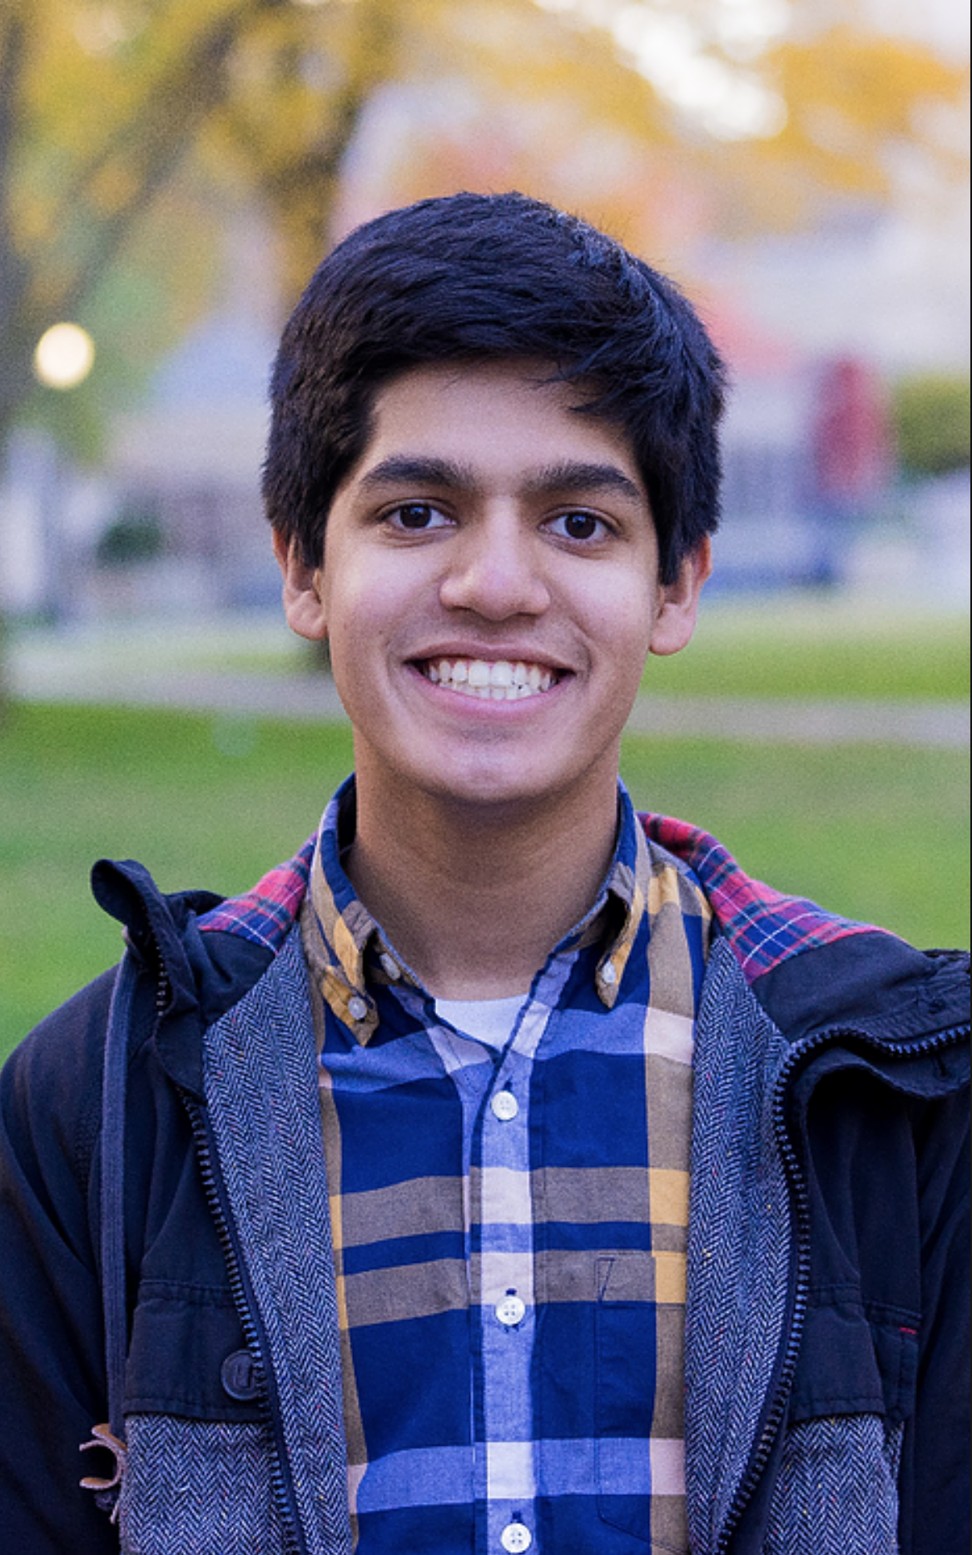 Ahmed formed the teen organisation Redefy.